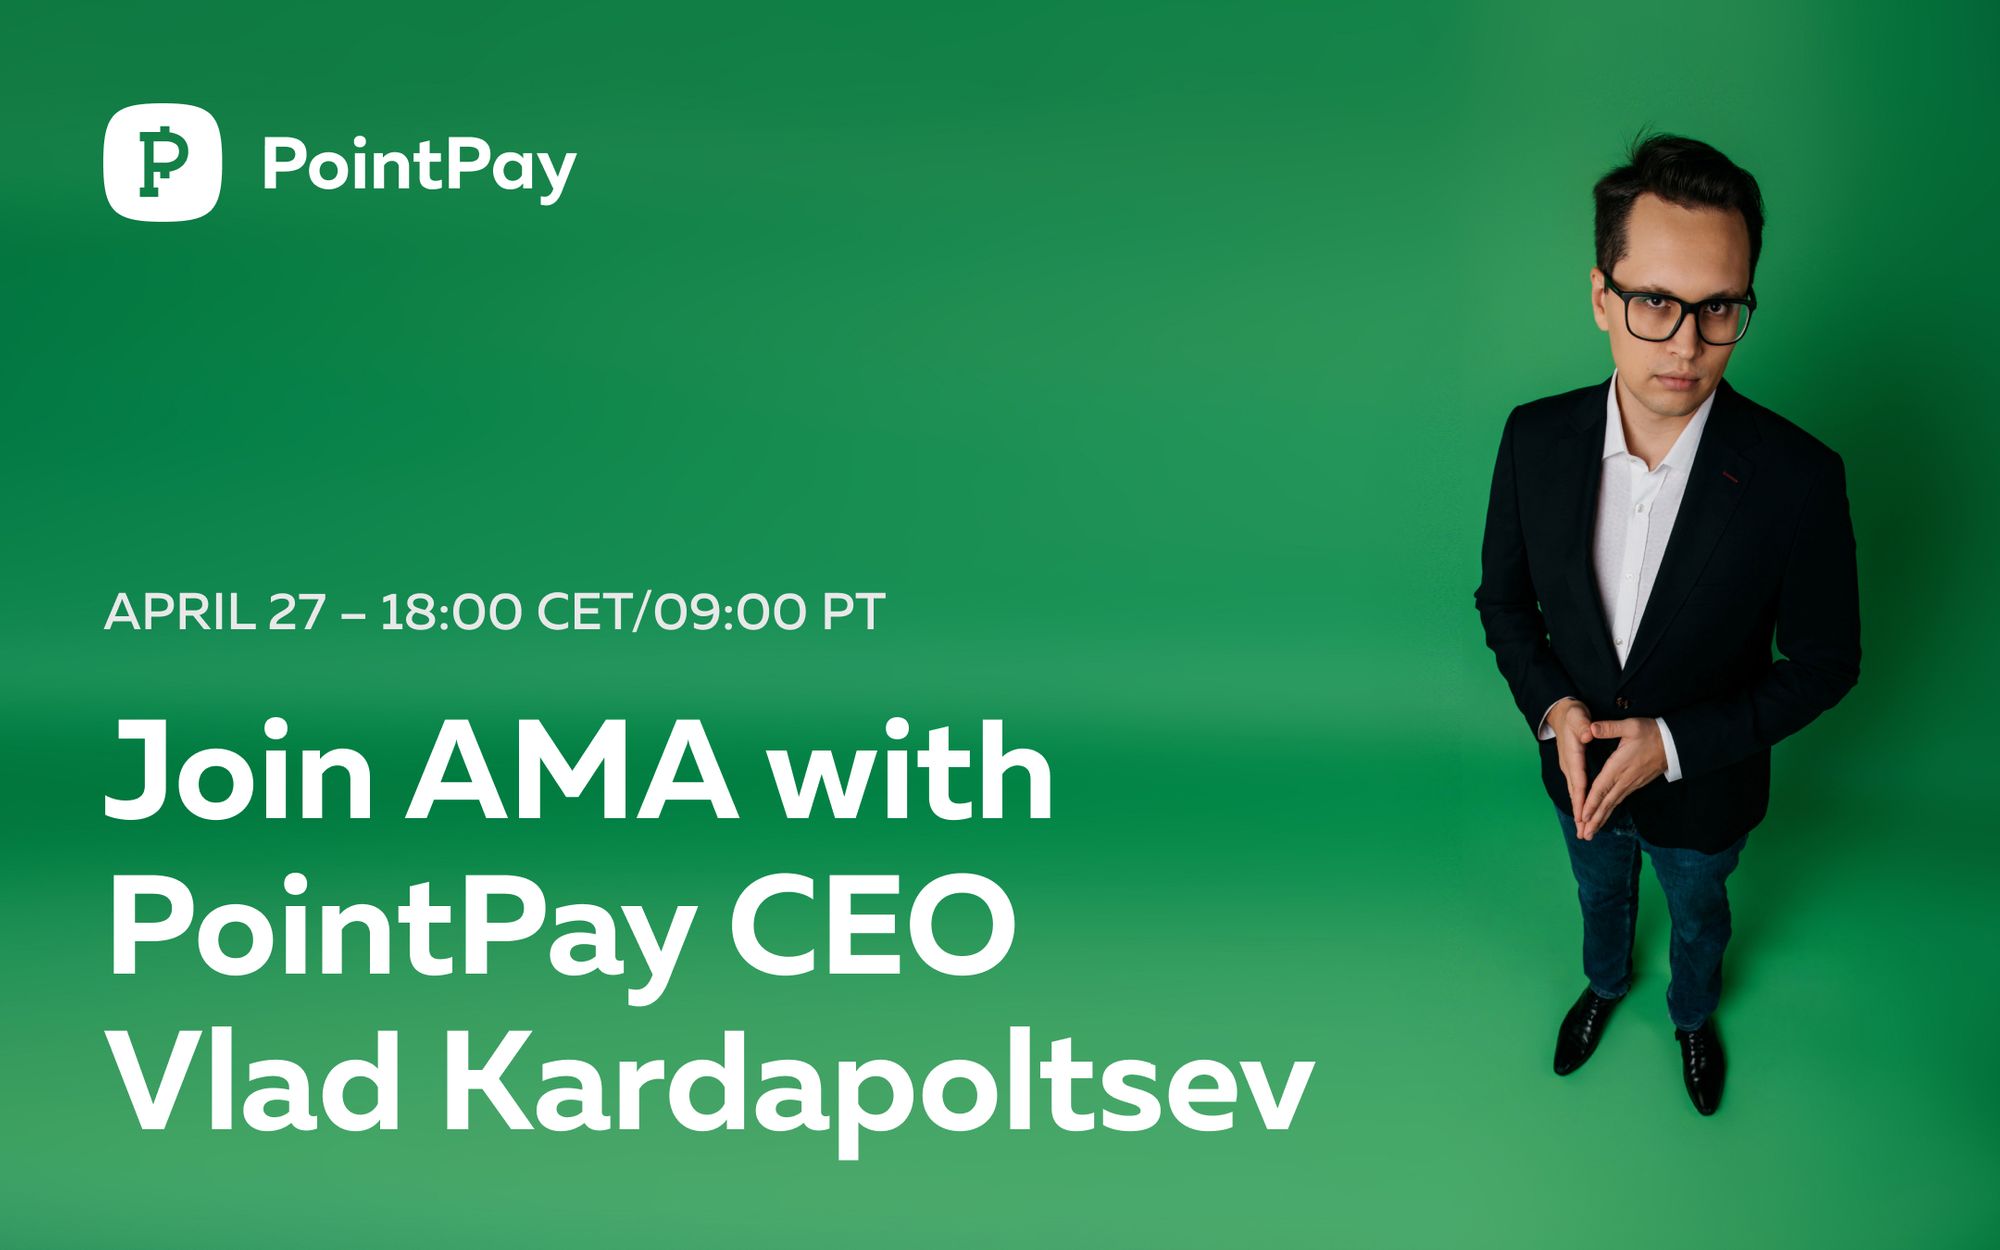 Join AMA with PointPay CEO Vladimir Kardapoltsev on April 27 (18:00 CET time)